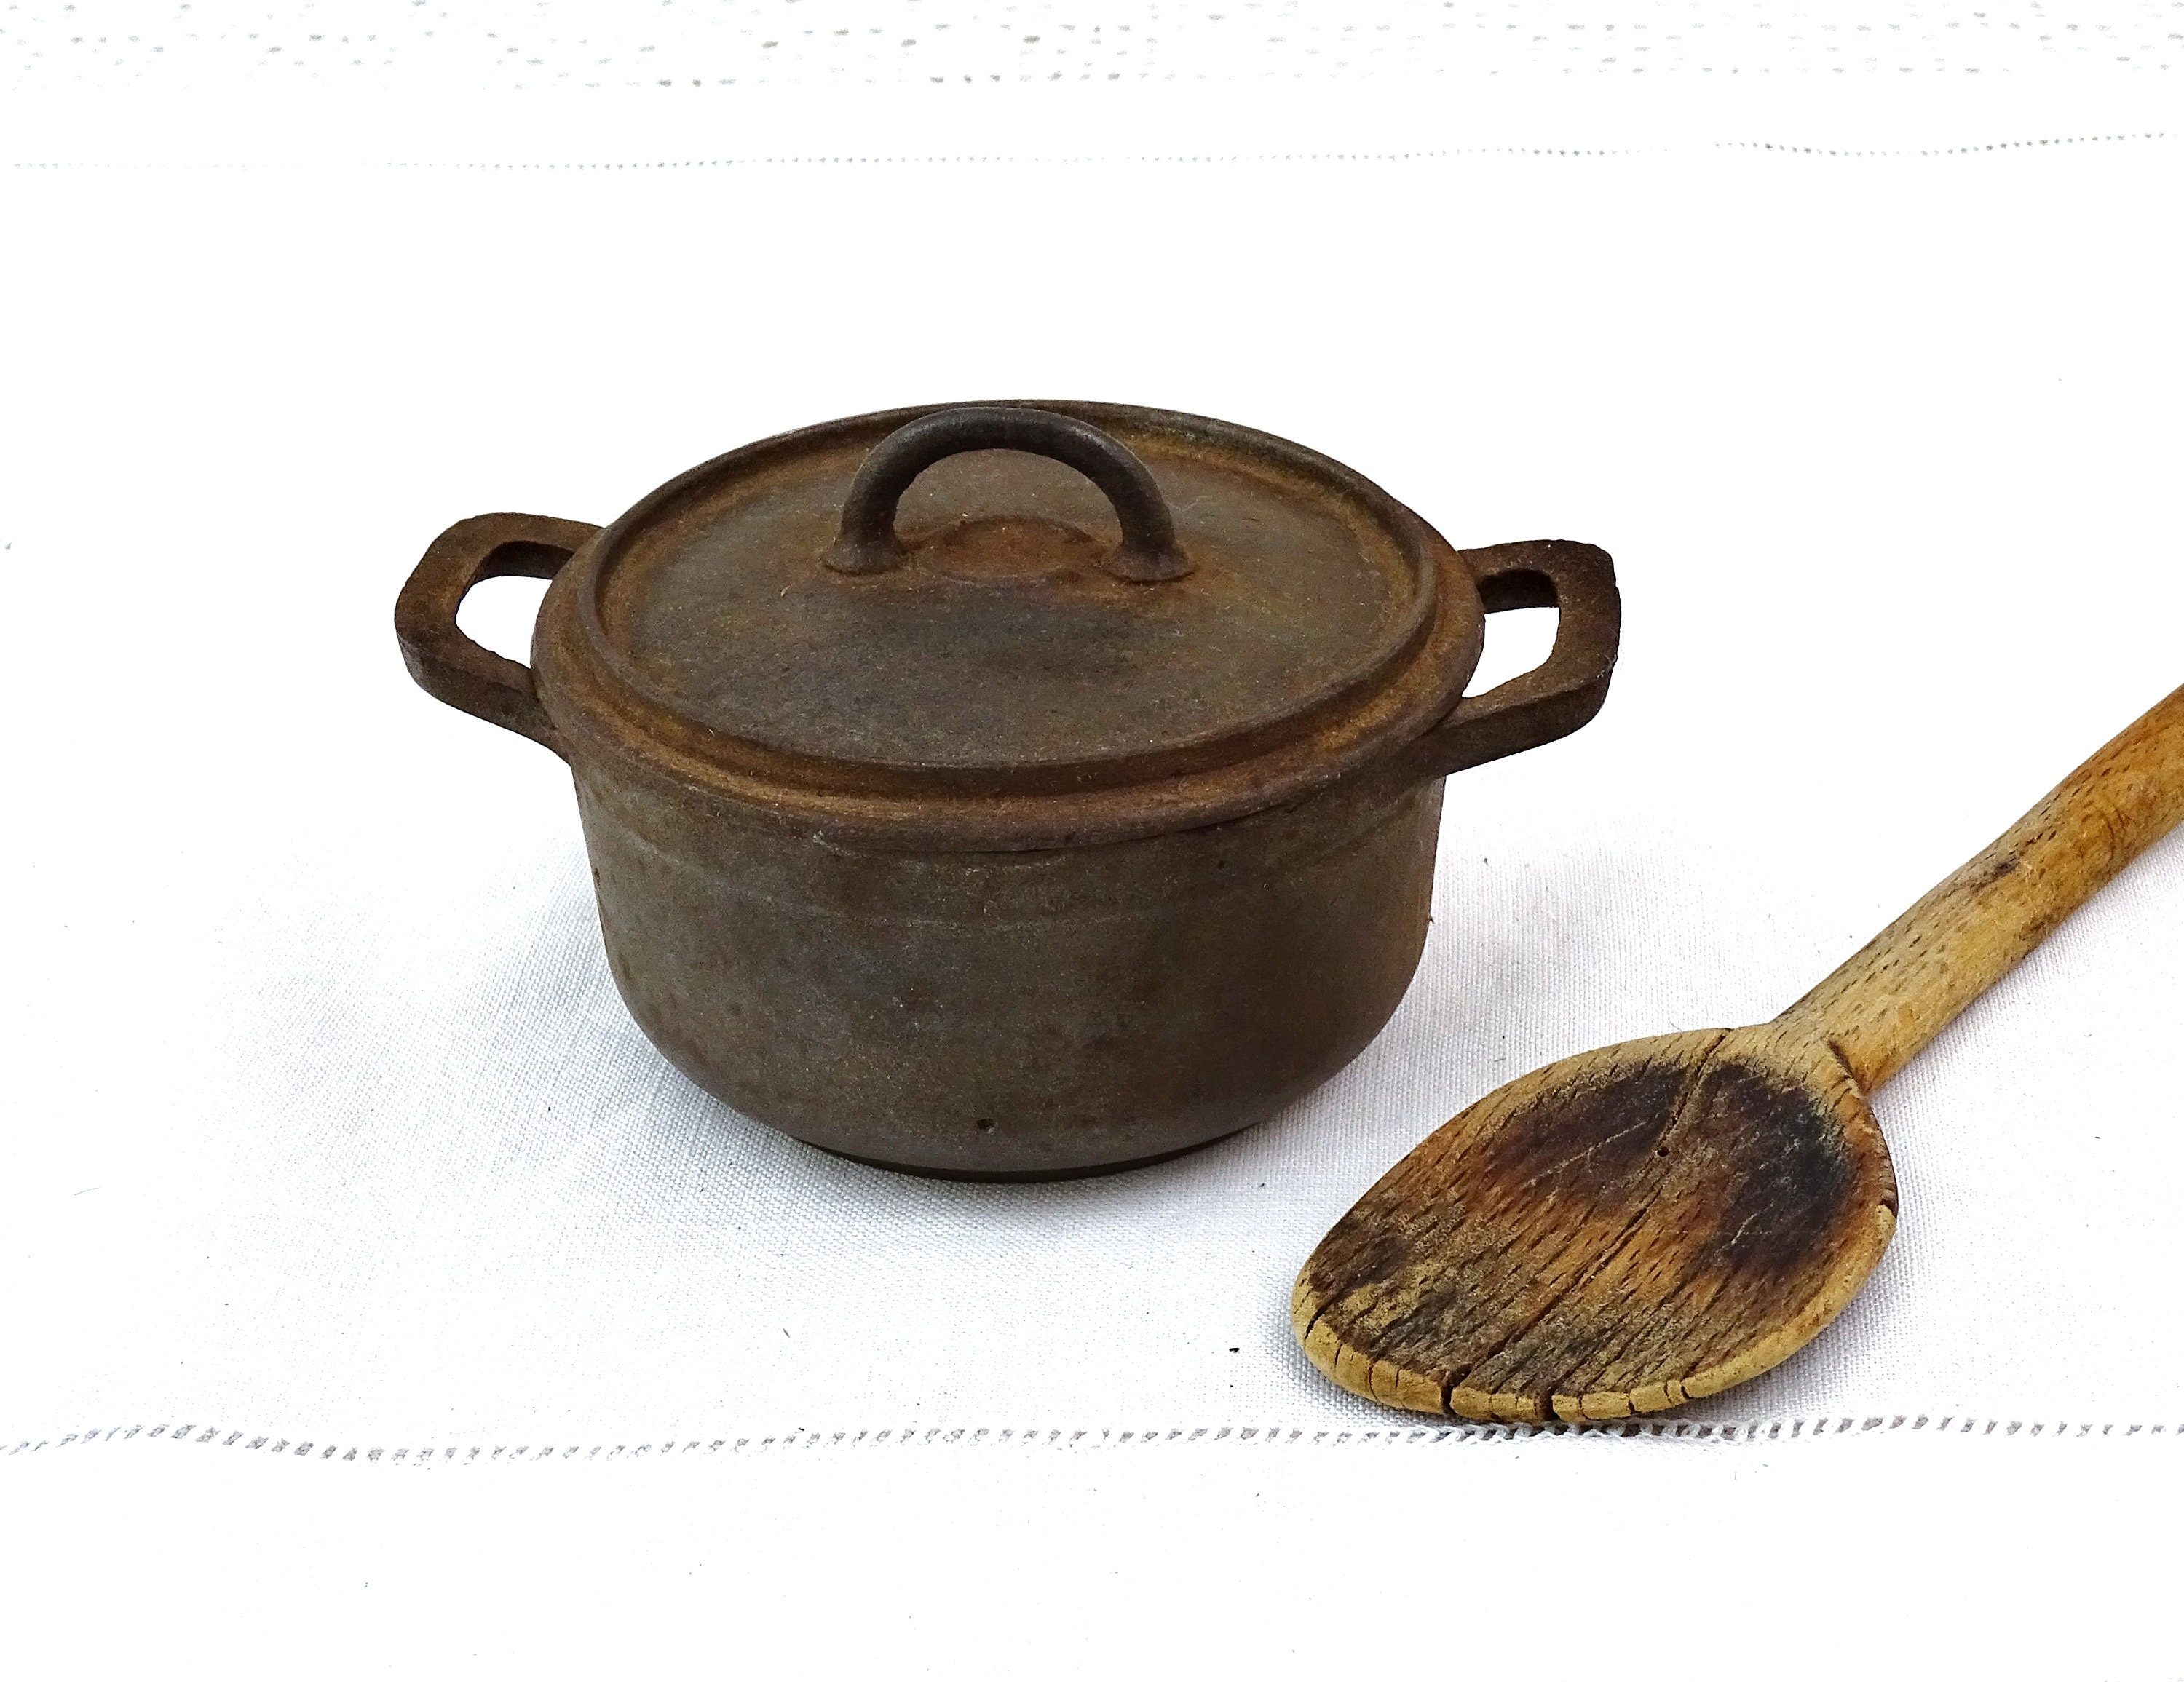 Small Toy Vintage French Cast Iron Cooking Pot with 2 Side Handles